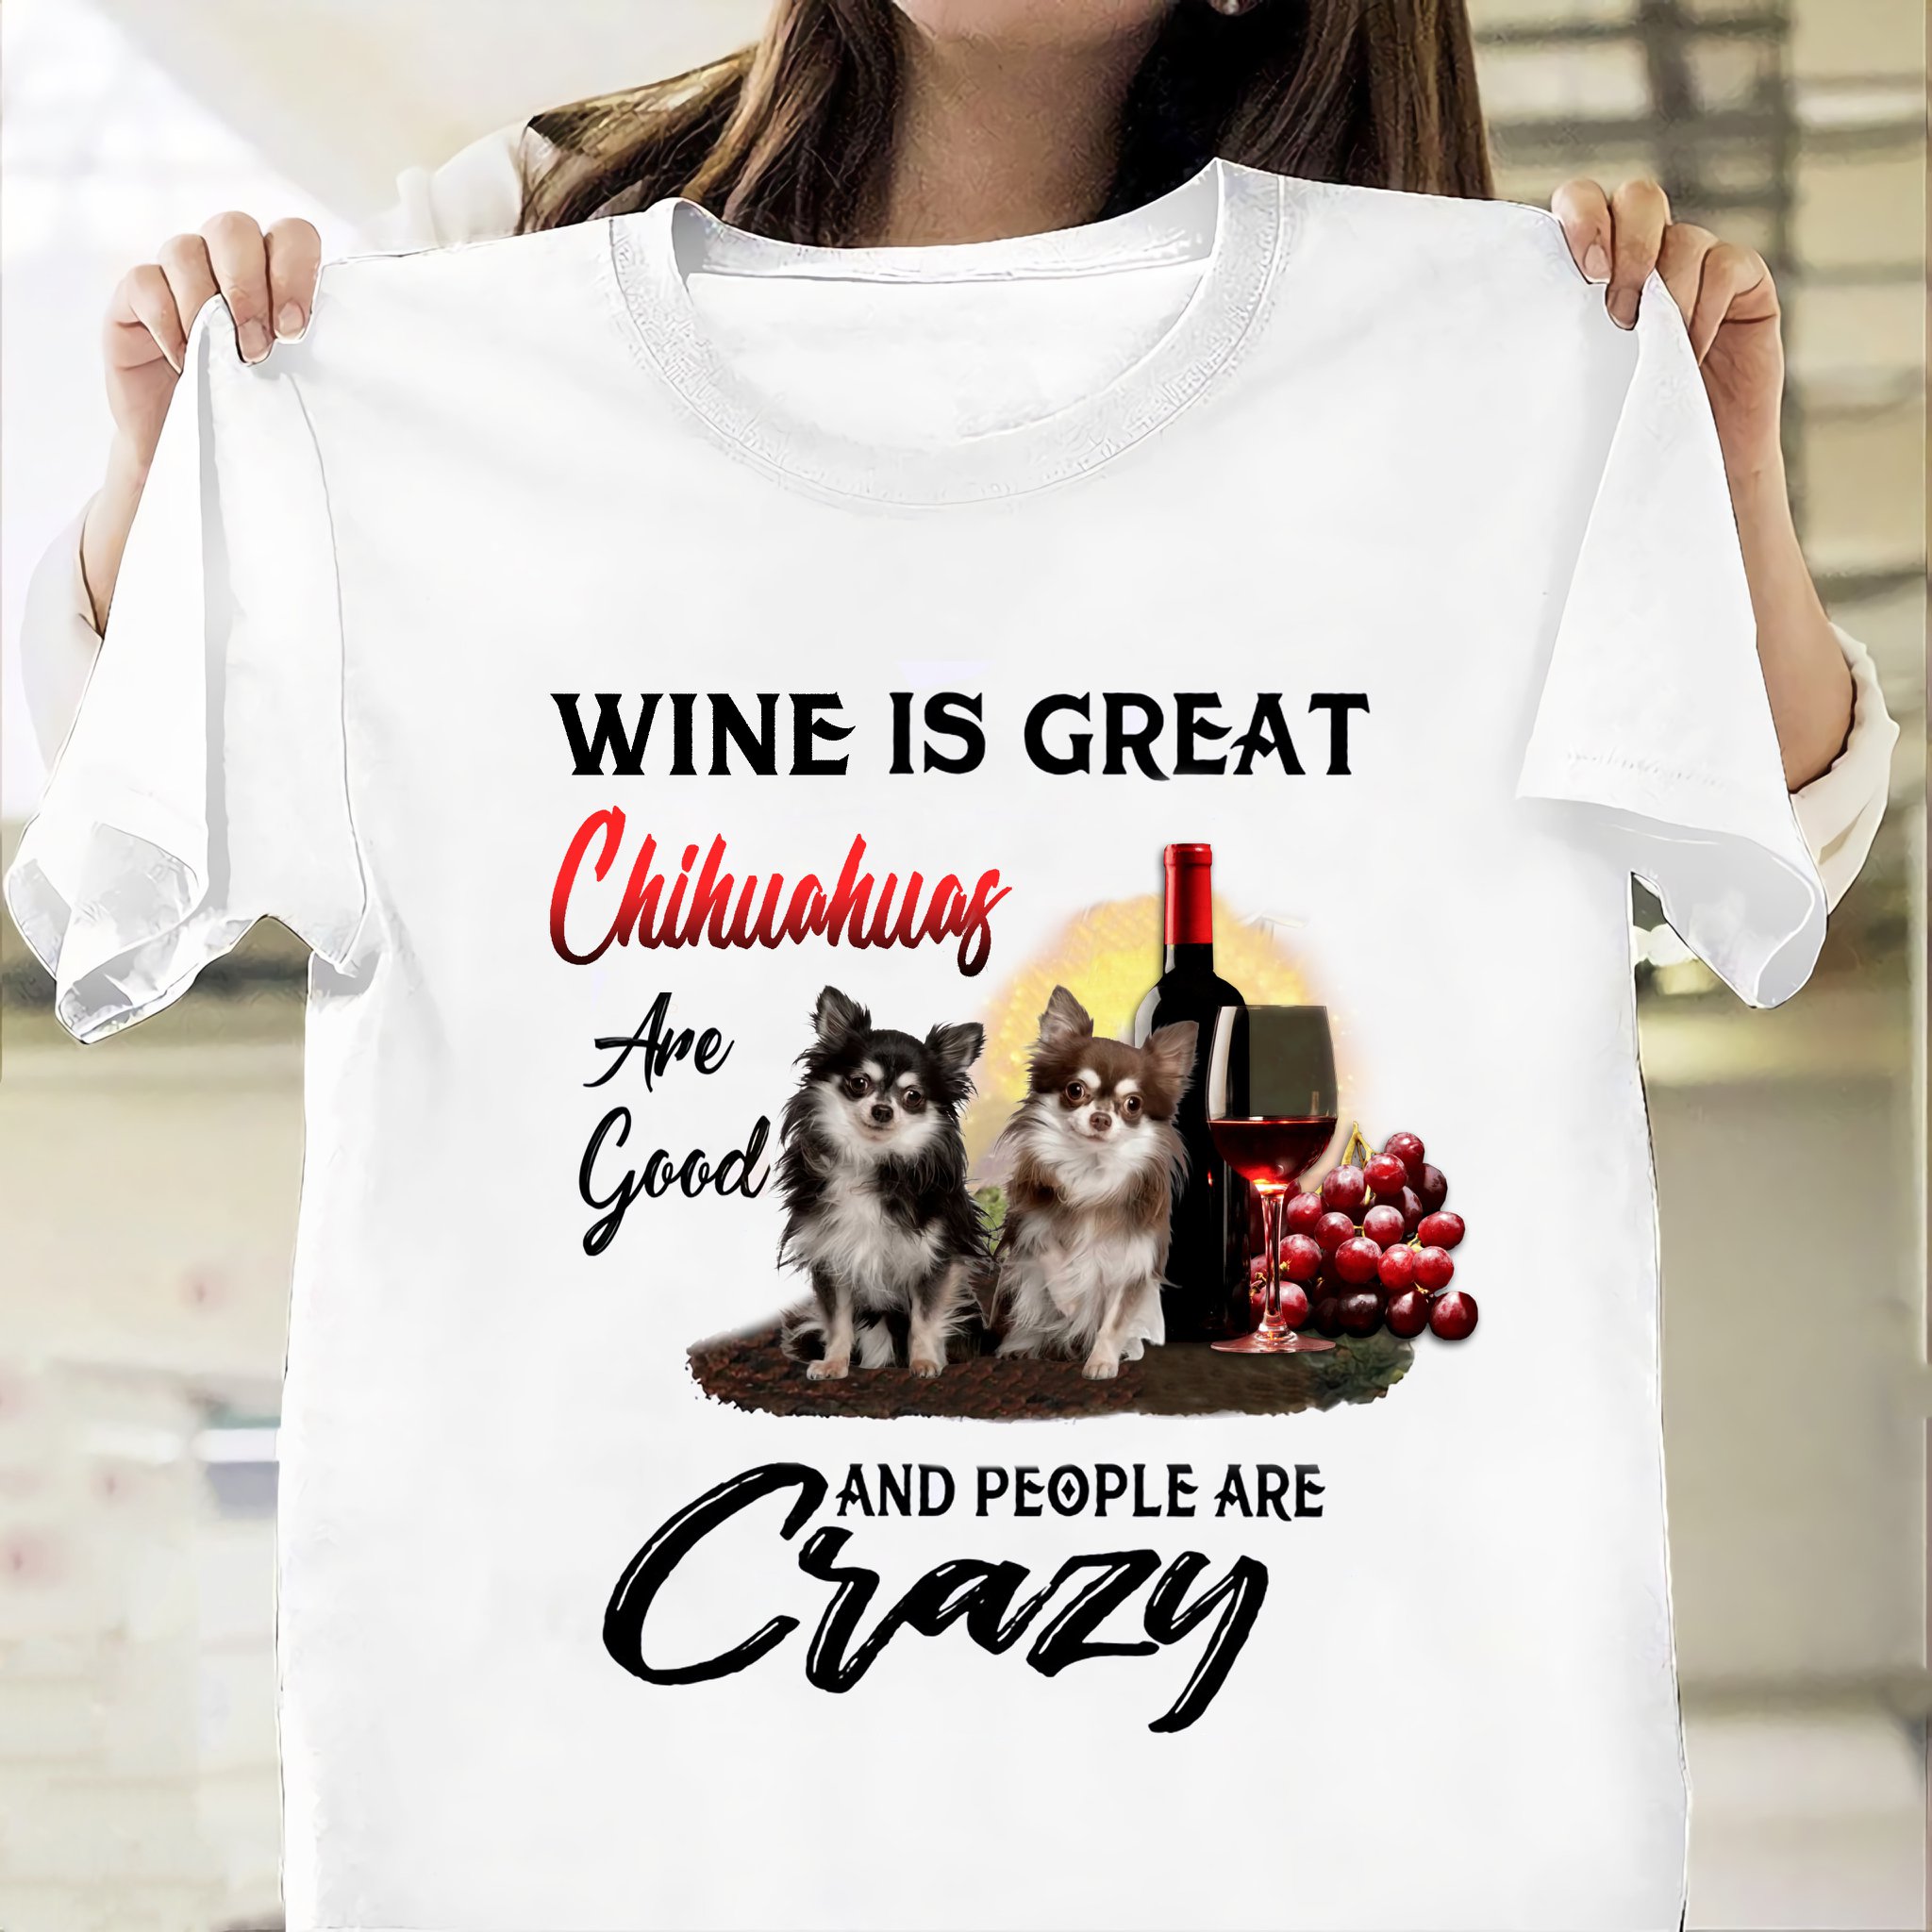 Wine is great Chihuahua are good and people are crazy - Chihuahua dog and grape wine